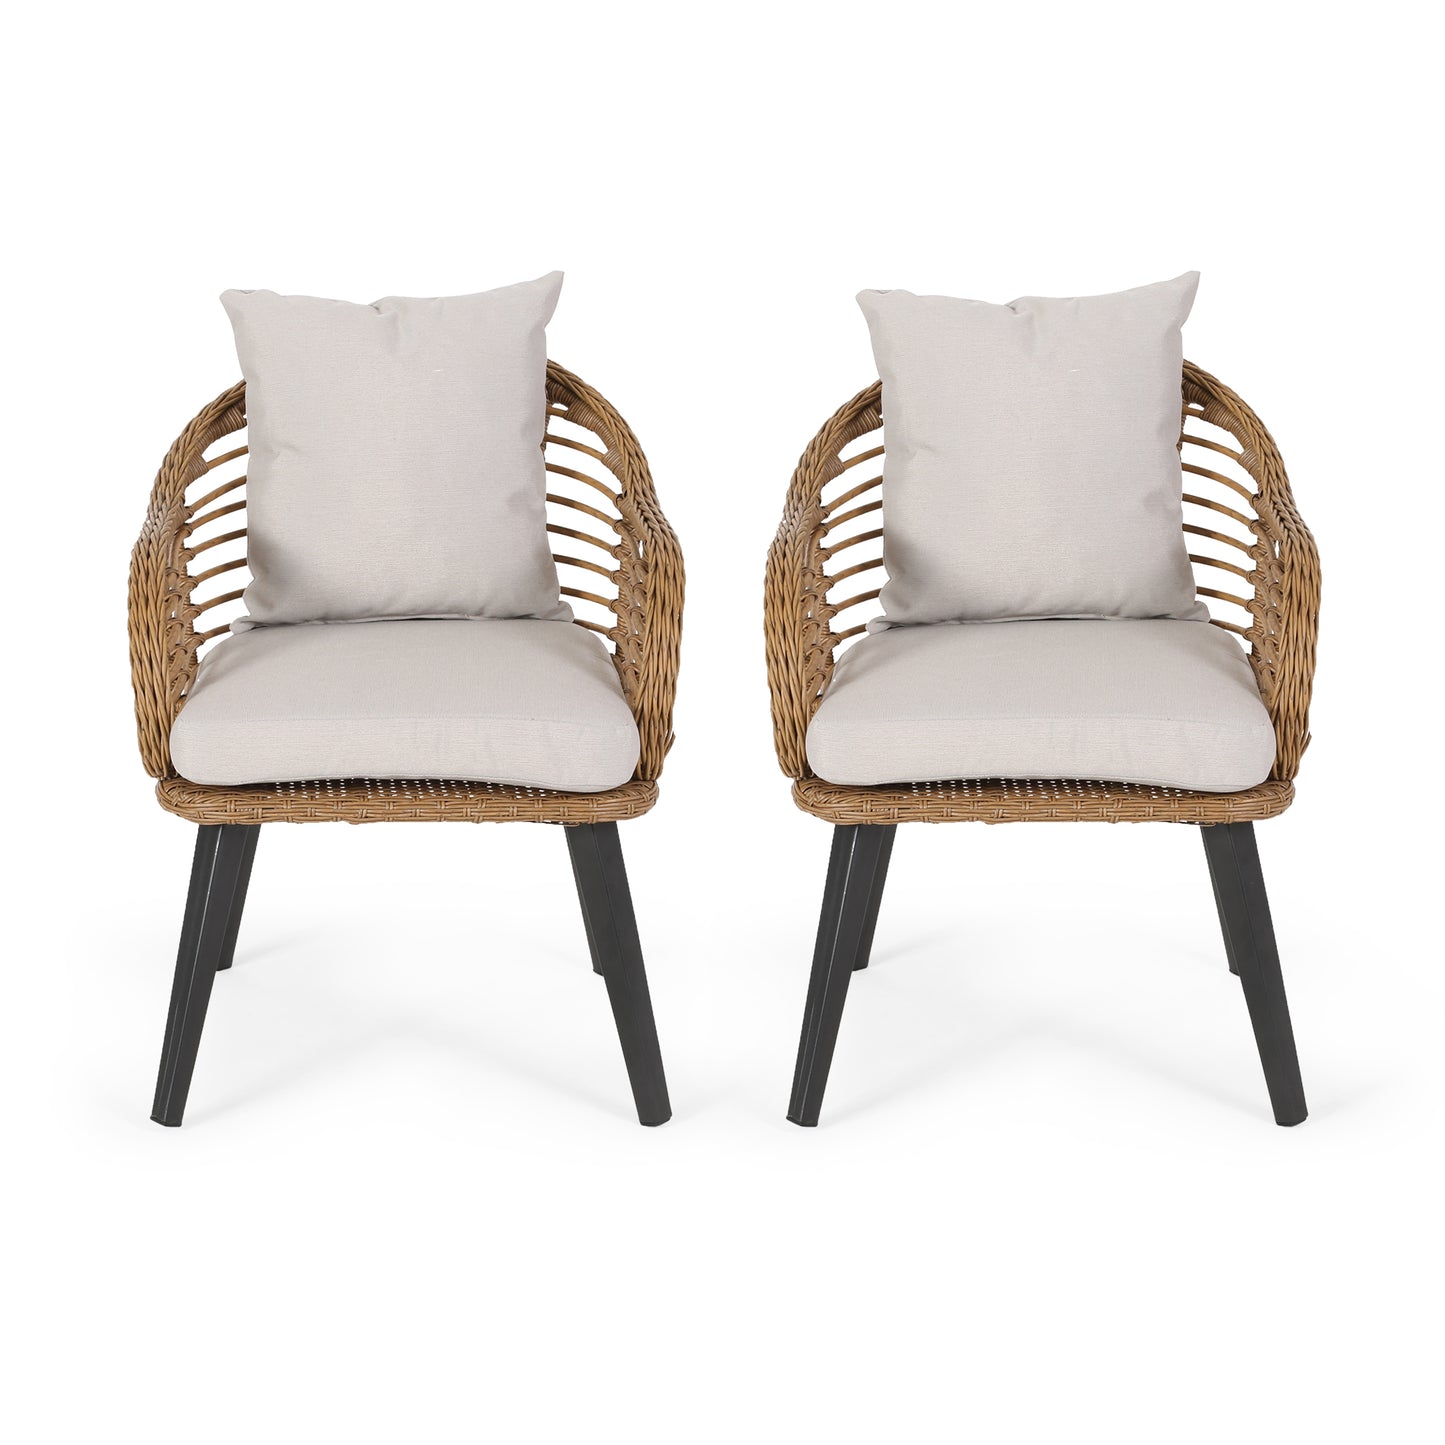 Madison Outdoor Wicker Club Chairs with Cushions (Set of 2)